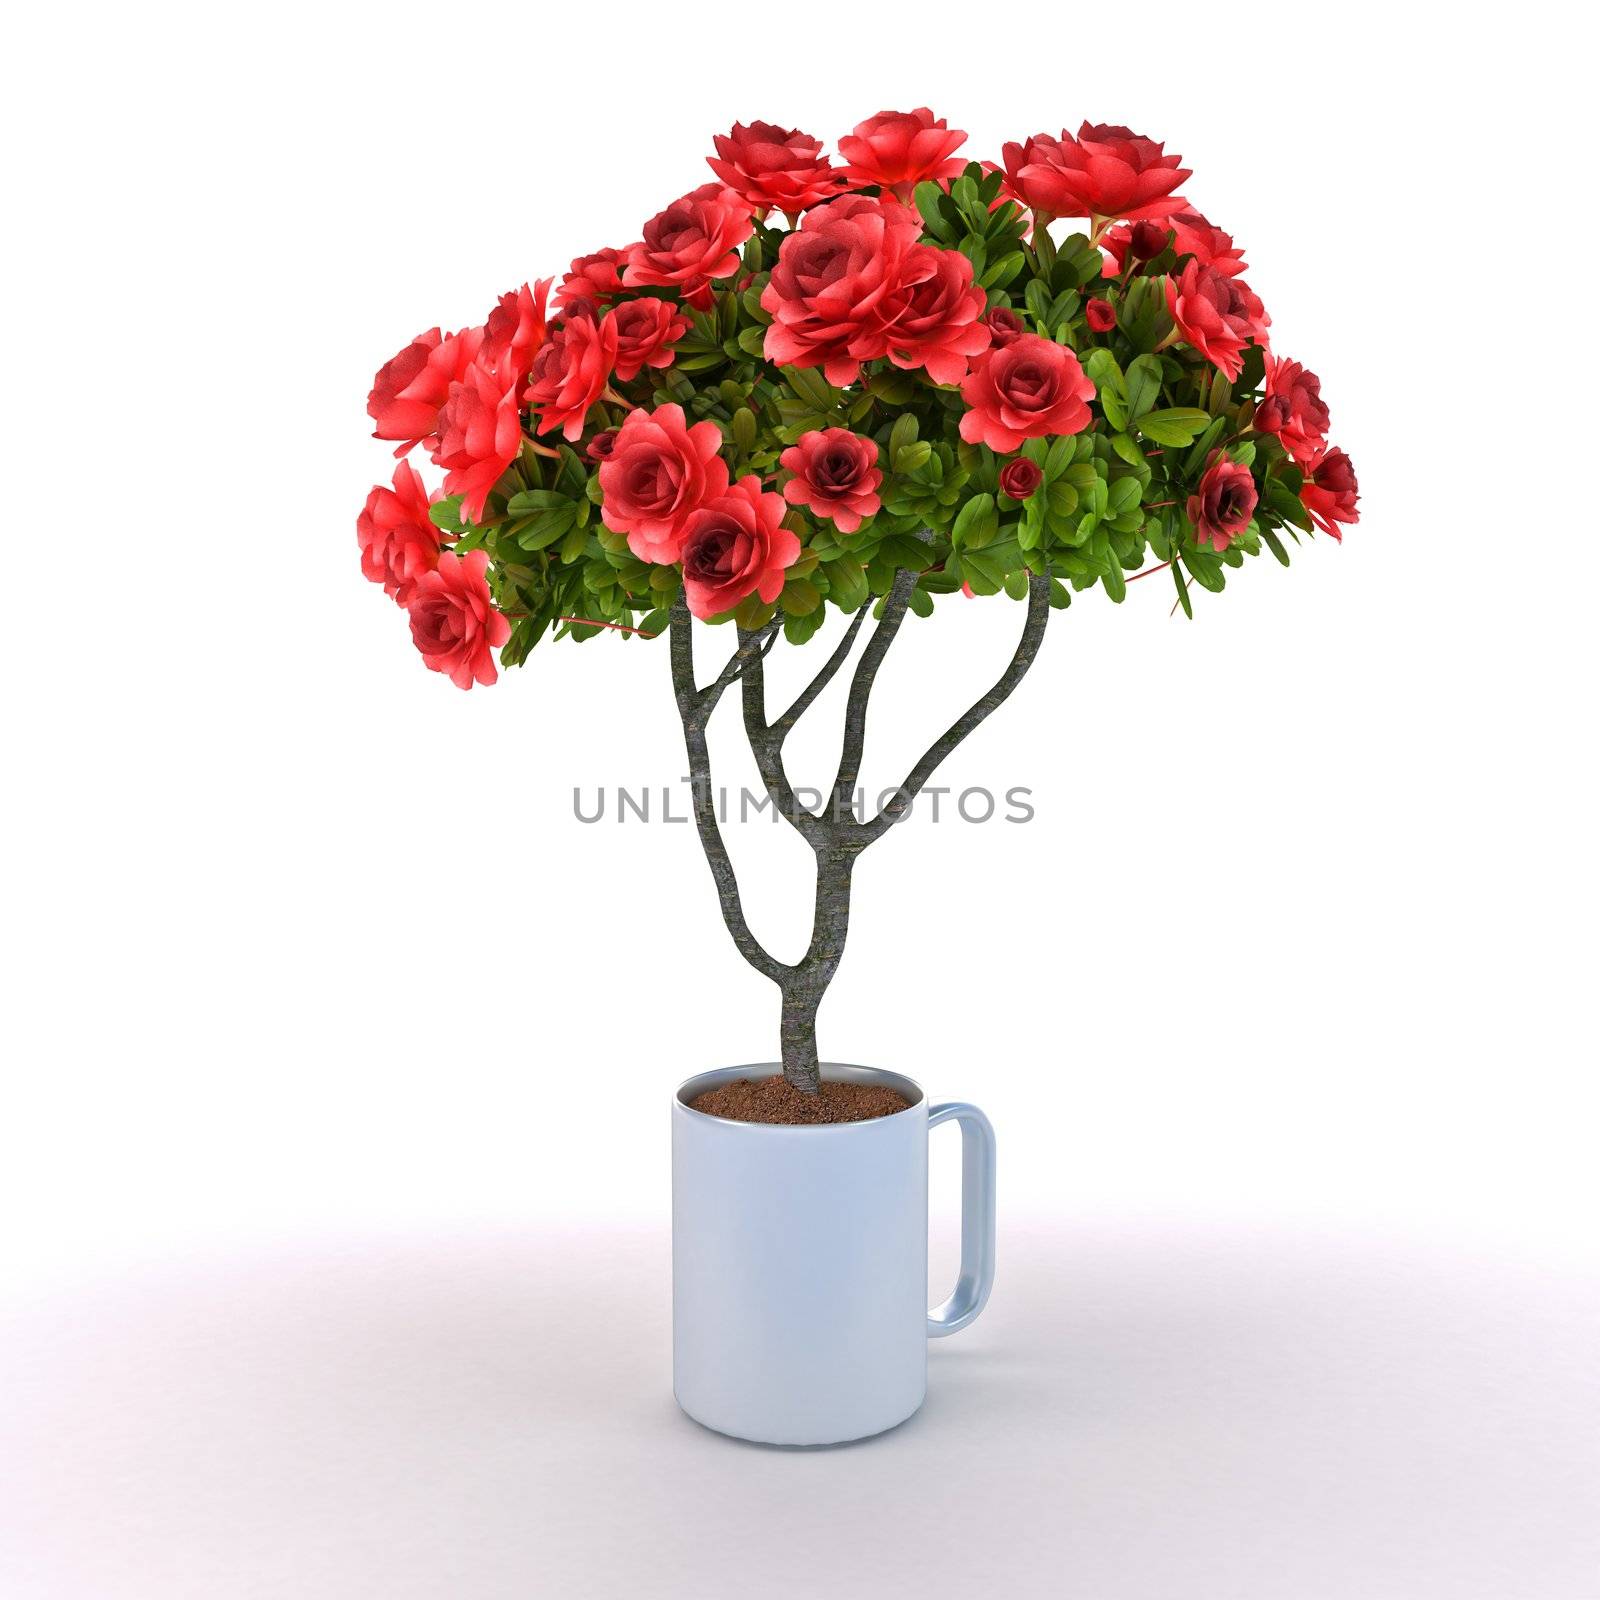 Rosebush grow from cup by richwolf